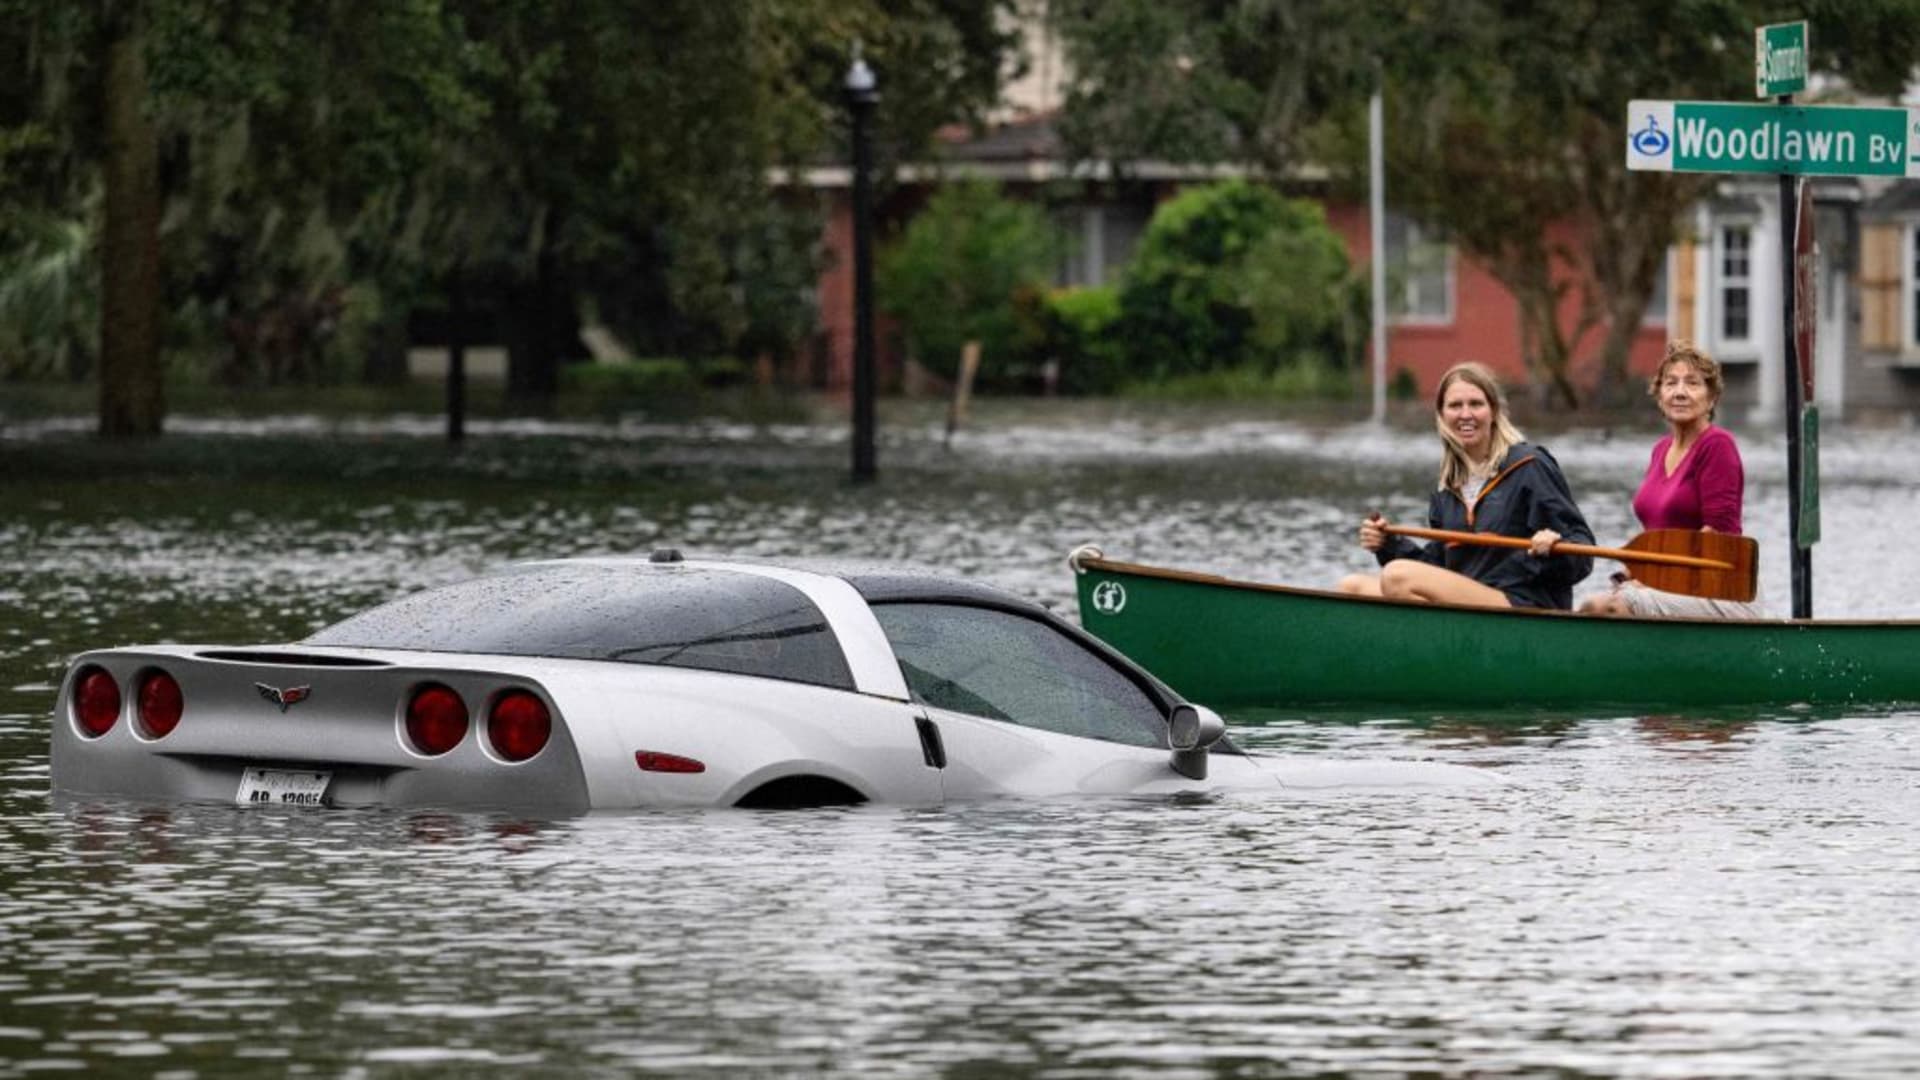 People paddle by in a canoe next to a submerged Chevy Corvette in the aftermath of Hurricane Ian in Orlando, Florida on September 29, 2022.